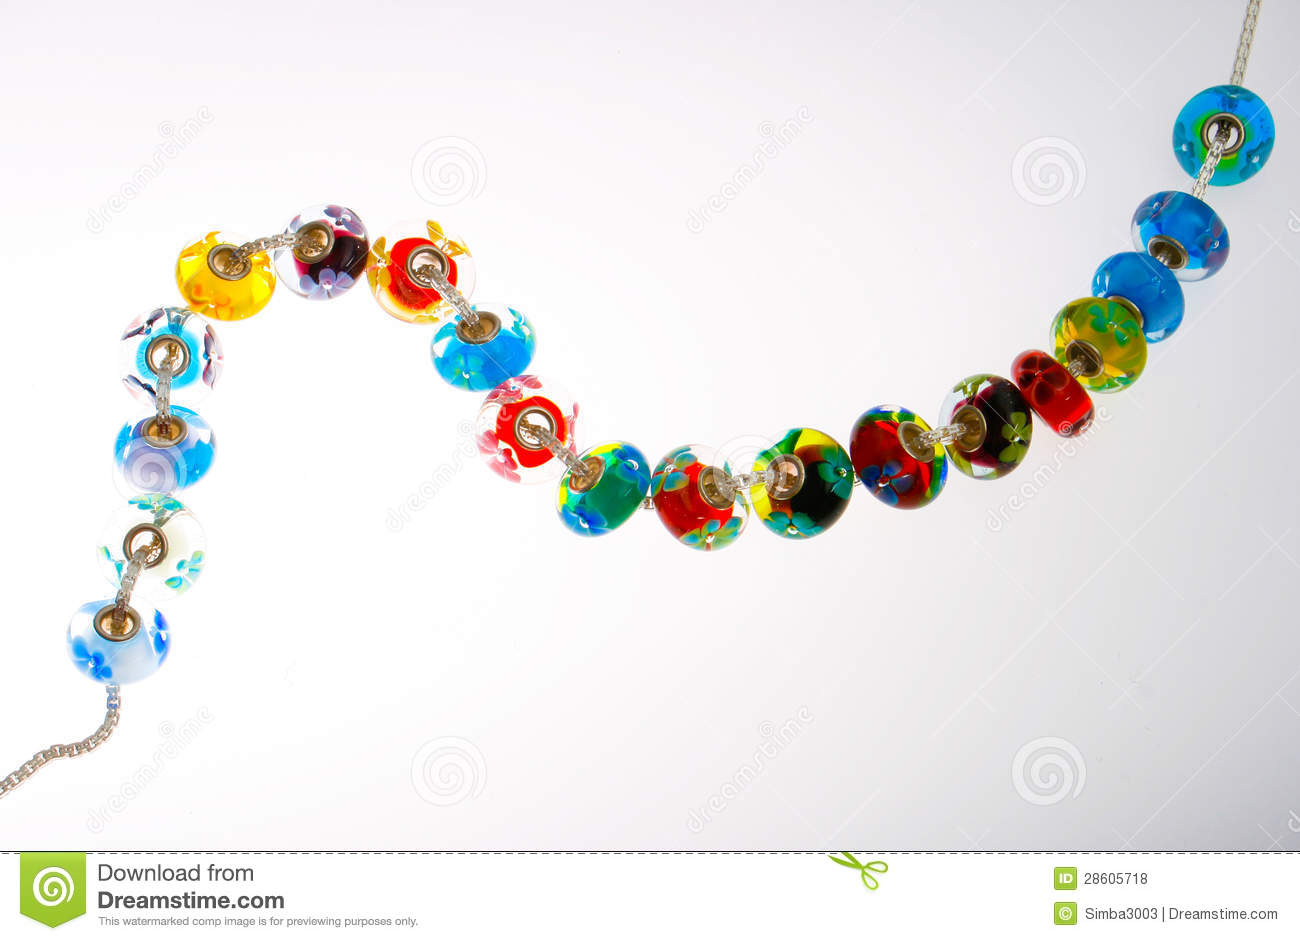 Glass Beads On String Royalty Free Stock Photos   Image  28605718